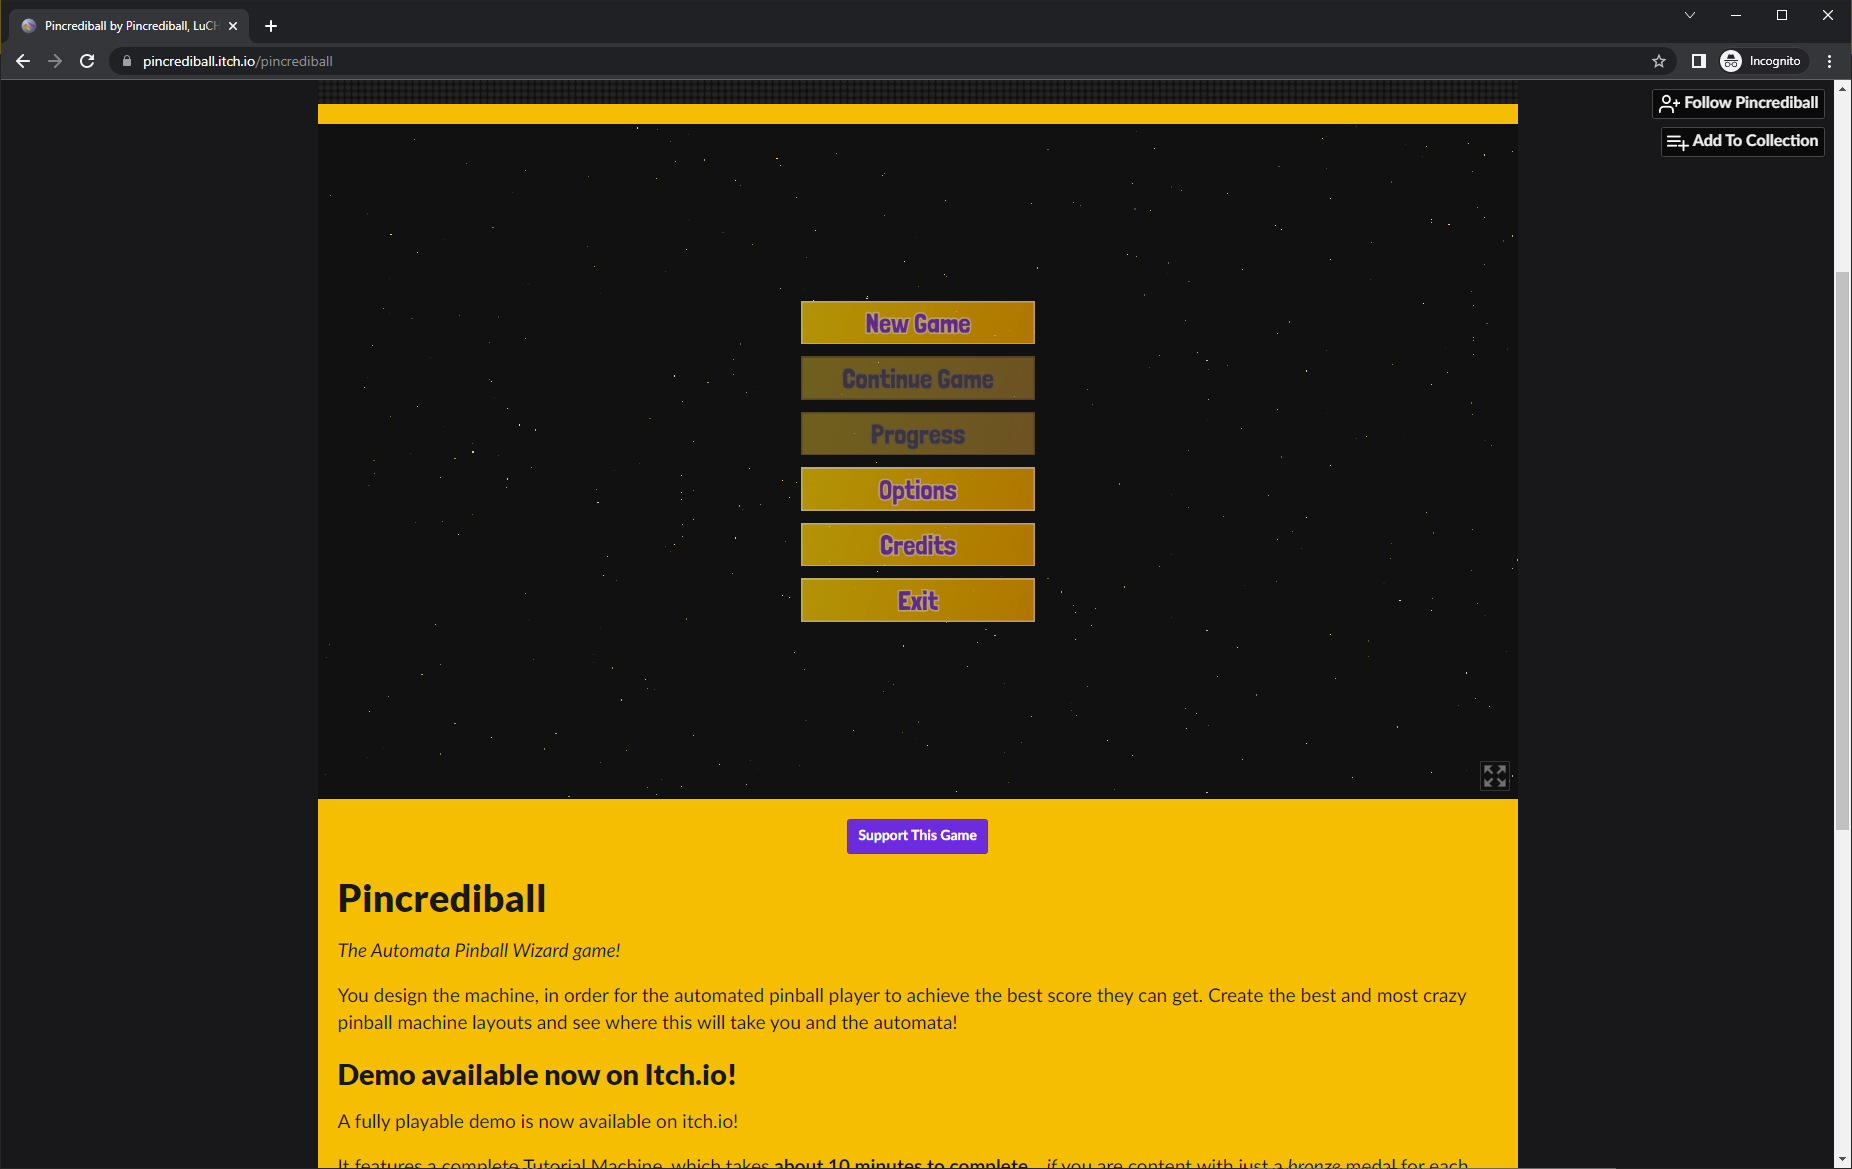 screenshot showing the bare bones game page